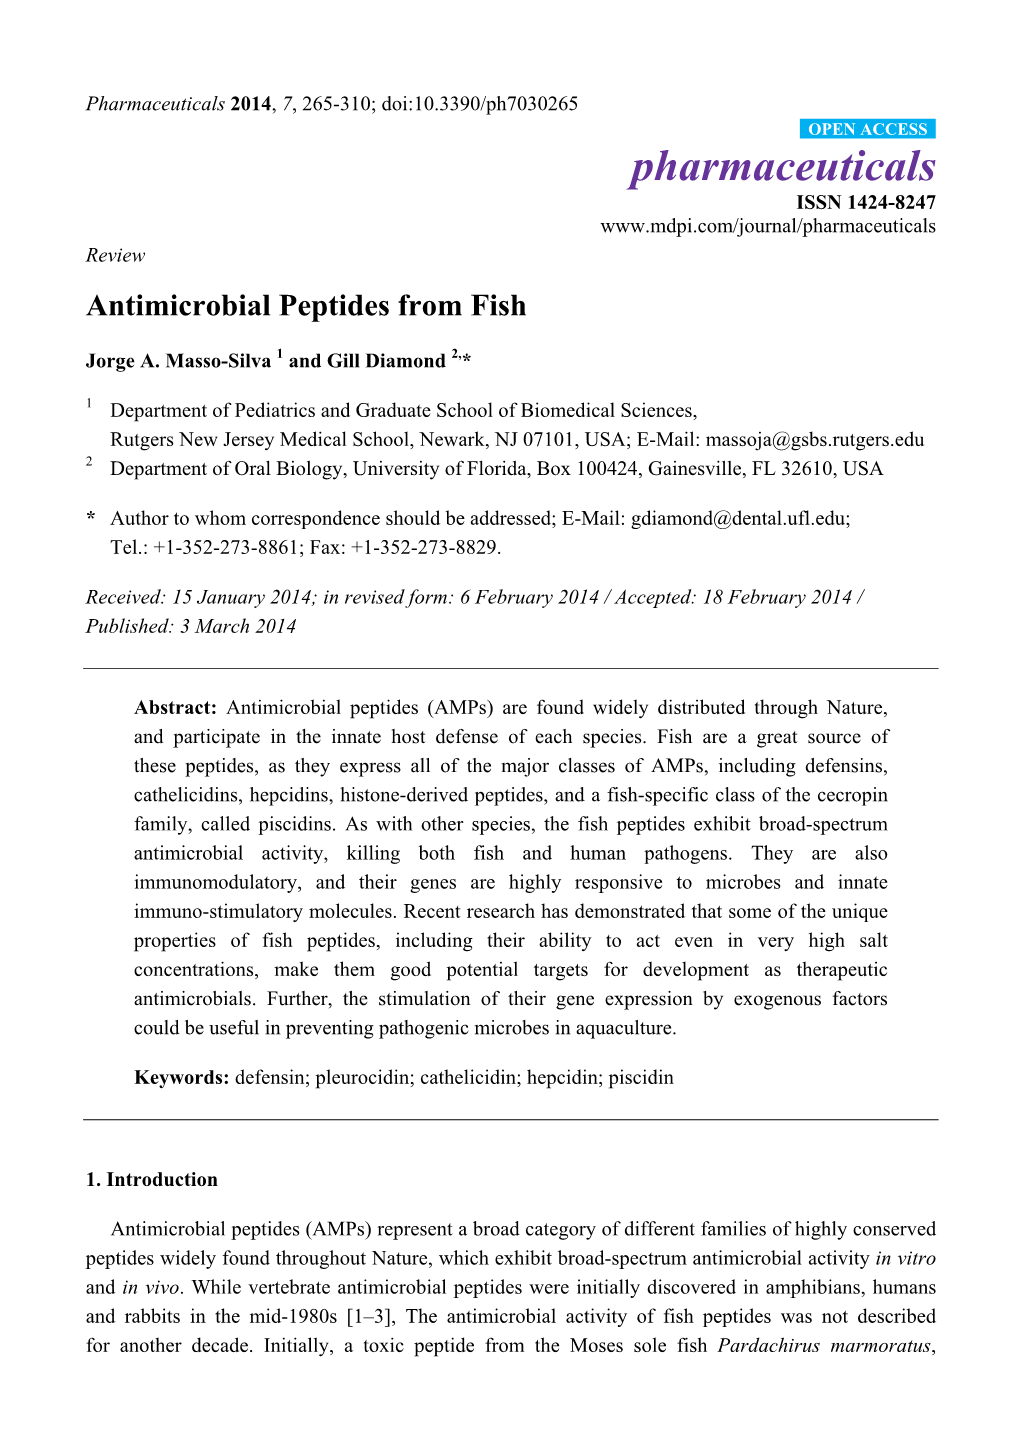 Antimicrobial Peptides from Fish